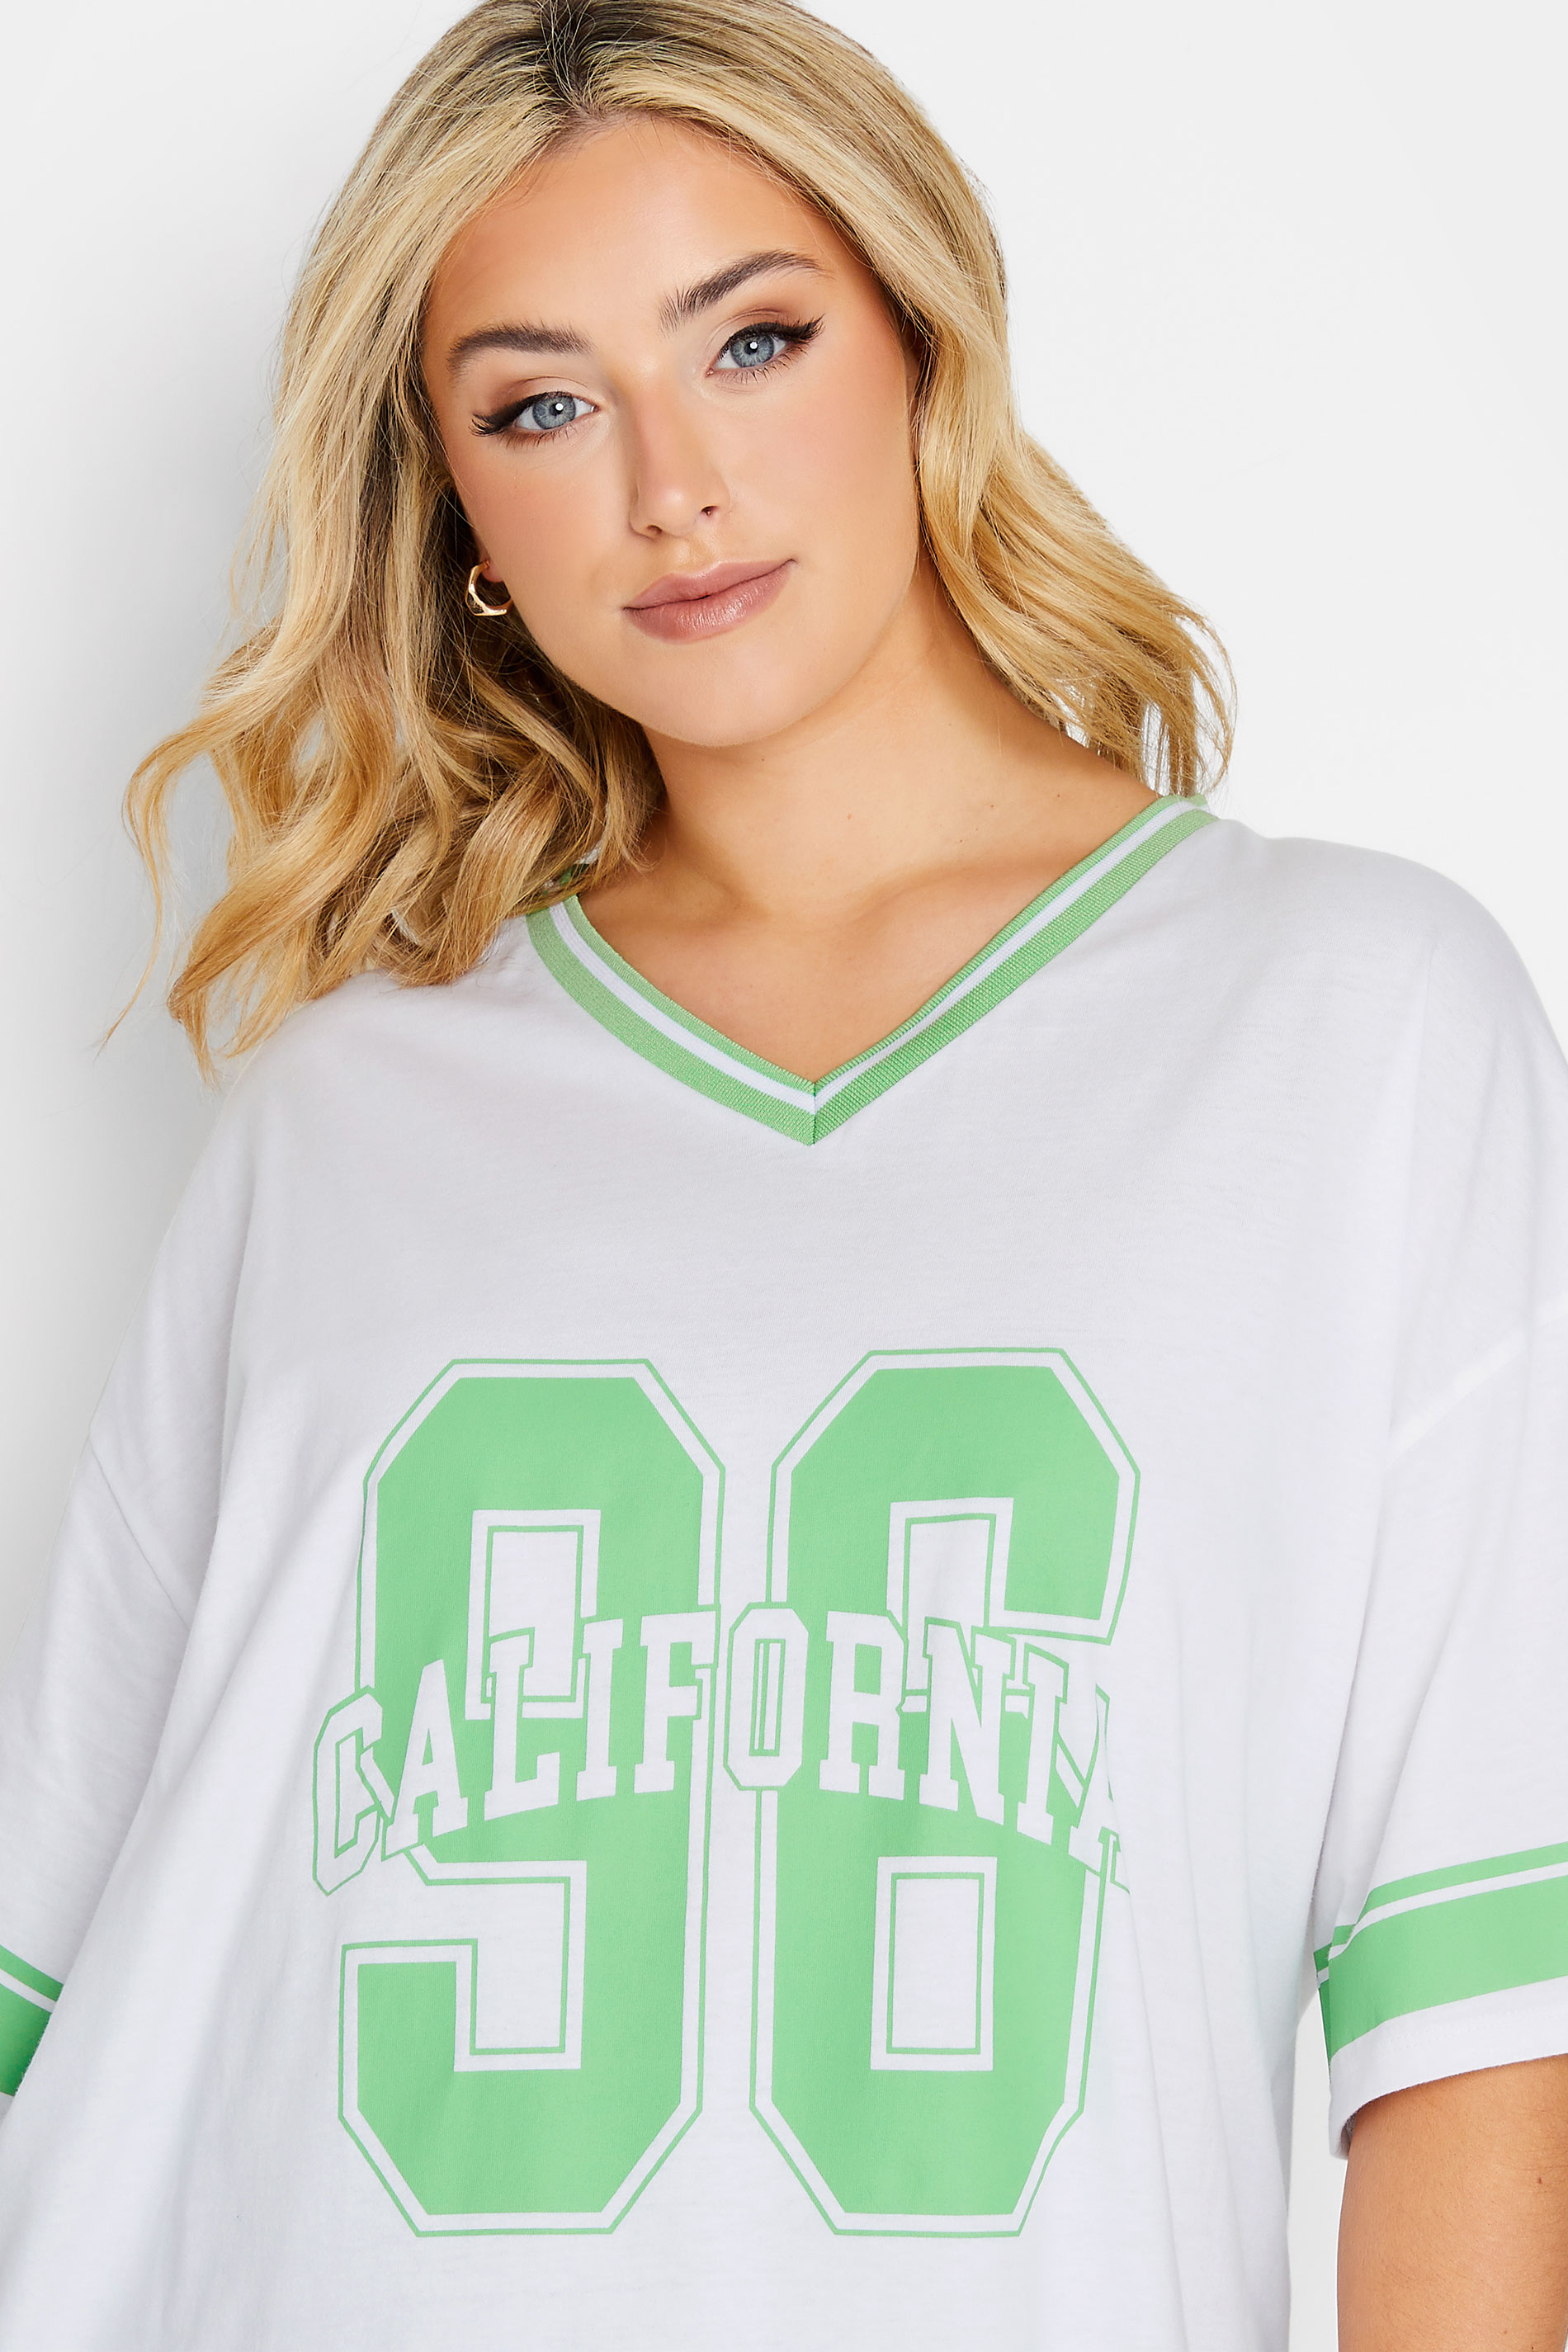 Plus Size Yours Curve Green 'Los Angeles' Slogan Varsity Tshirt Size 22-24 | Women's Plus Size and Curve Fashion